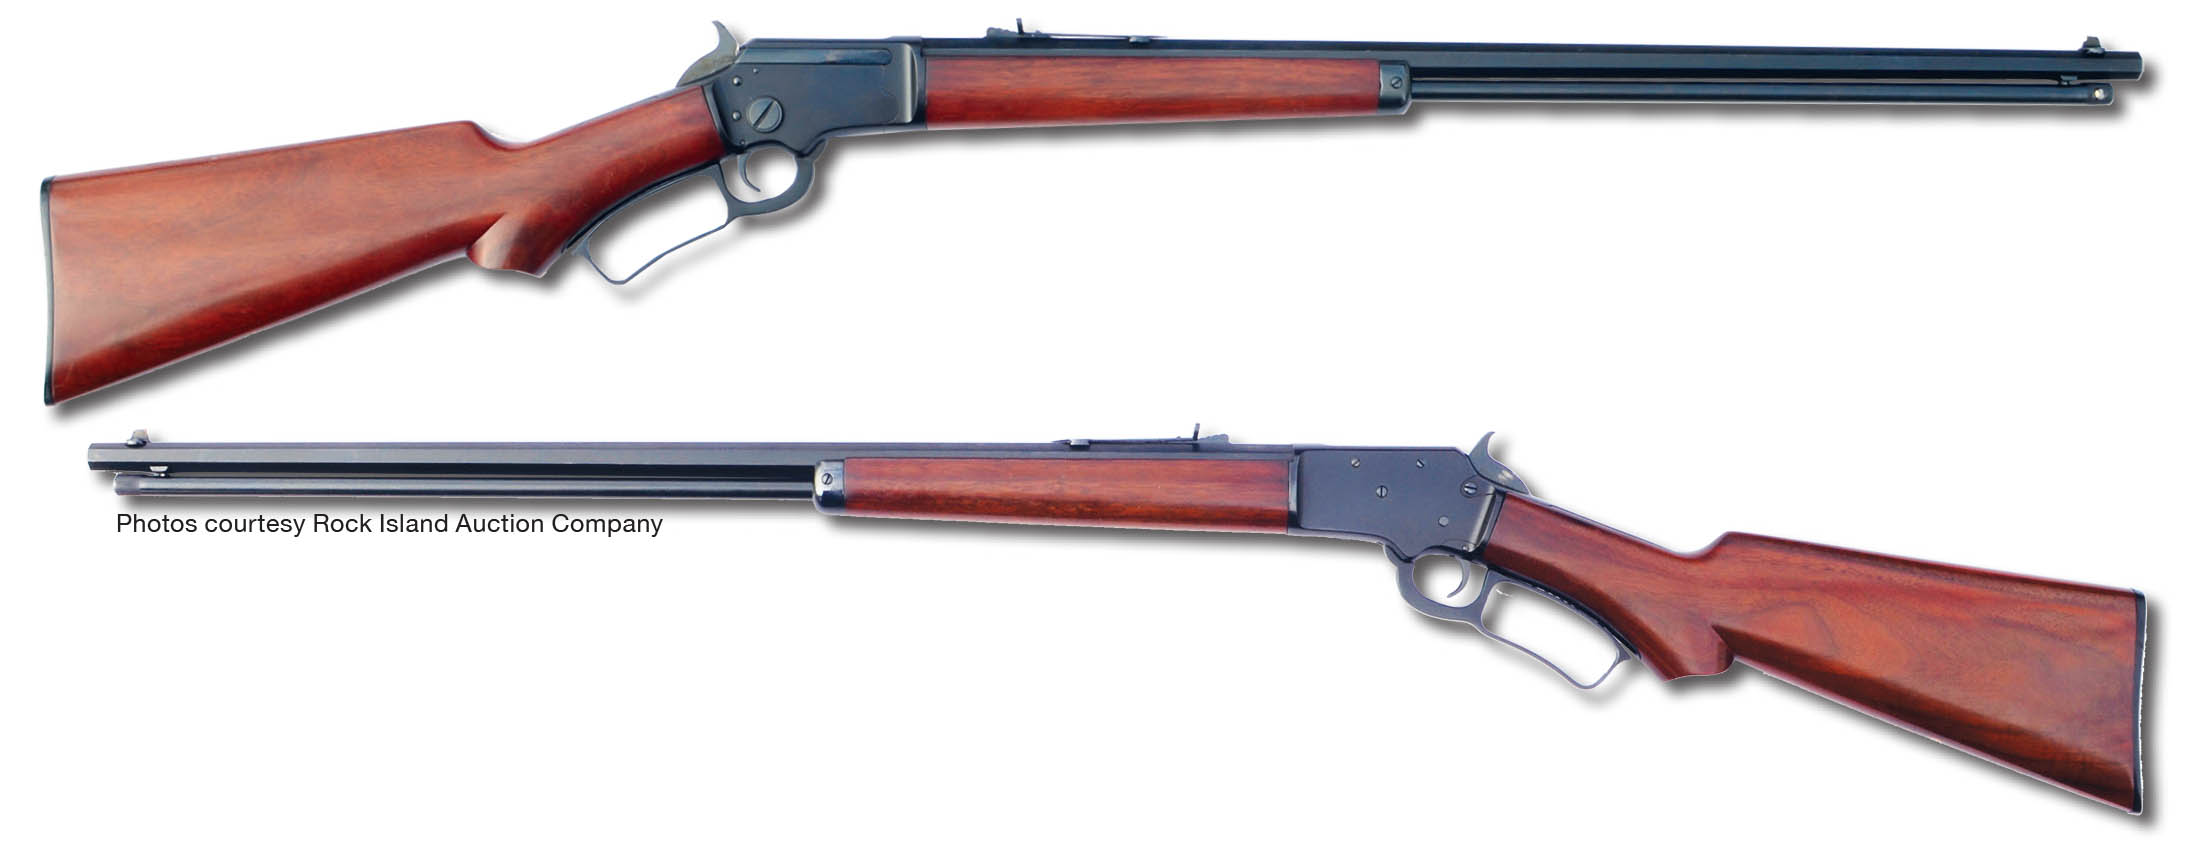 This Model 39 was made in the 1920s or early ’30s. It is the early, classic rifle configuration with the S-type pistol grip, slim forend and 24-inch octagonal barrel. The S-grip was phased out by 1935 in favor of straight grips, and when the pistol grip was reintroduced a few years later, it had a “modern” grip cap. In 1939, the rifle became the 39A with a round barrel and long, “fat” beavertail forend.  Photos courtesy Rock Island Auction Company